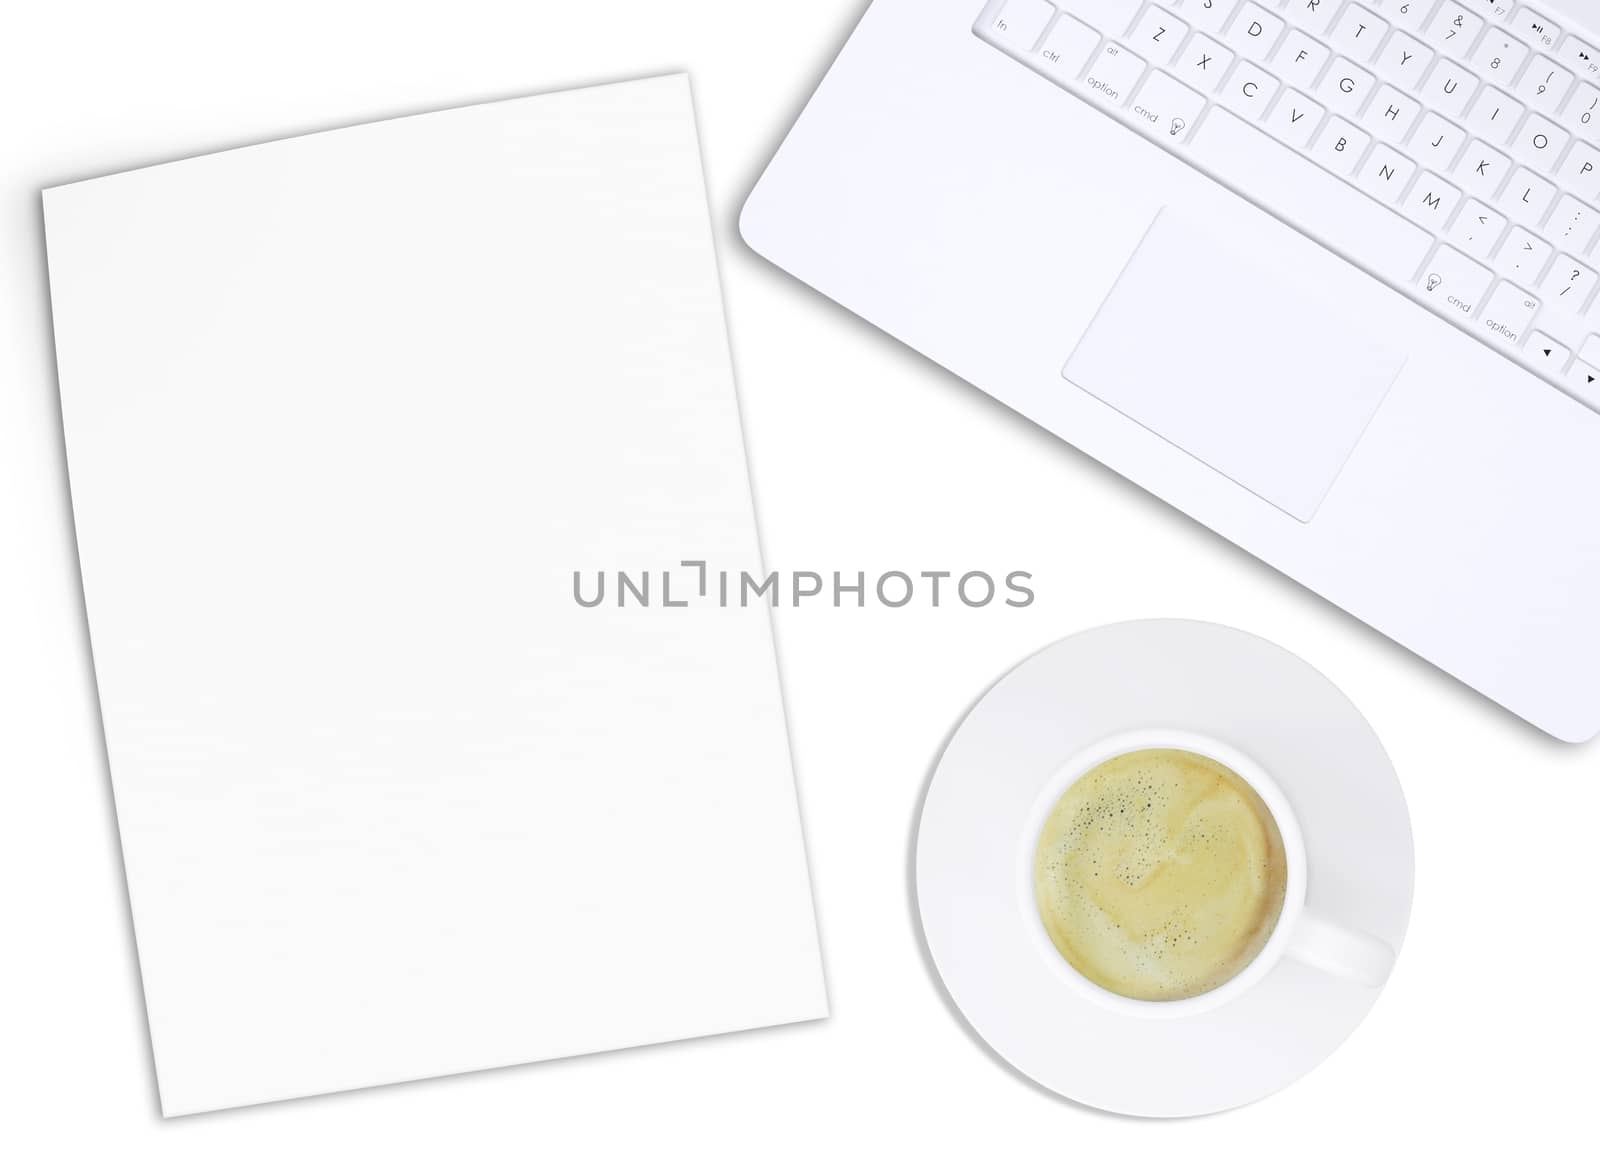 White laptop and coffee cup on isolated white background, top view. Closed up